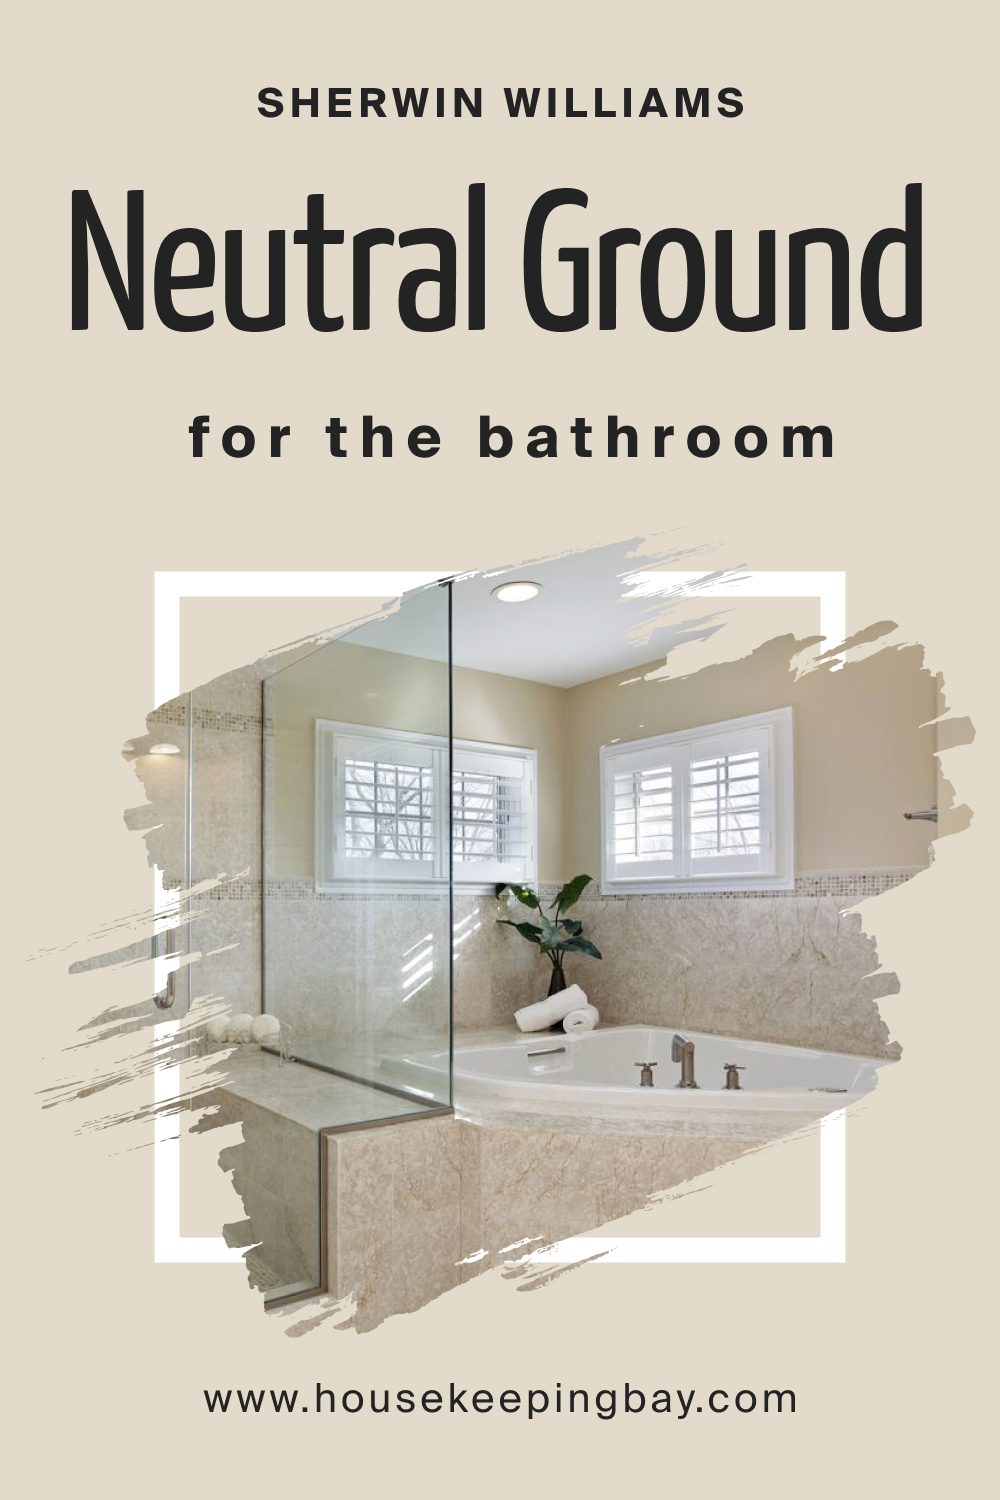 Sherwin Williams. Neutral Ground For the Bathroom